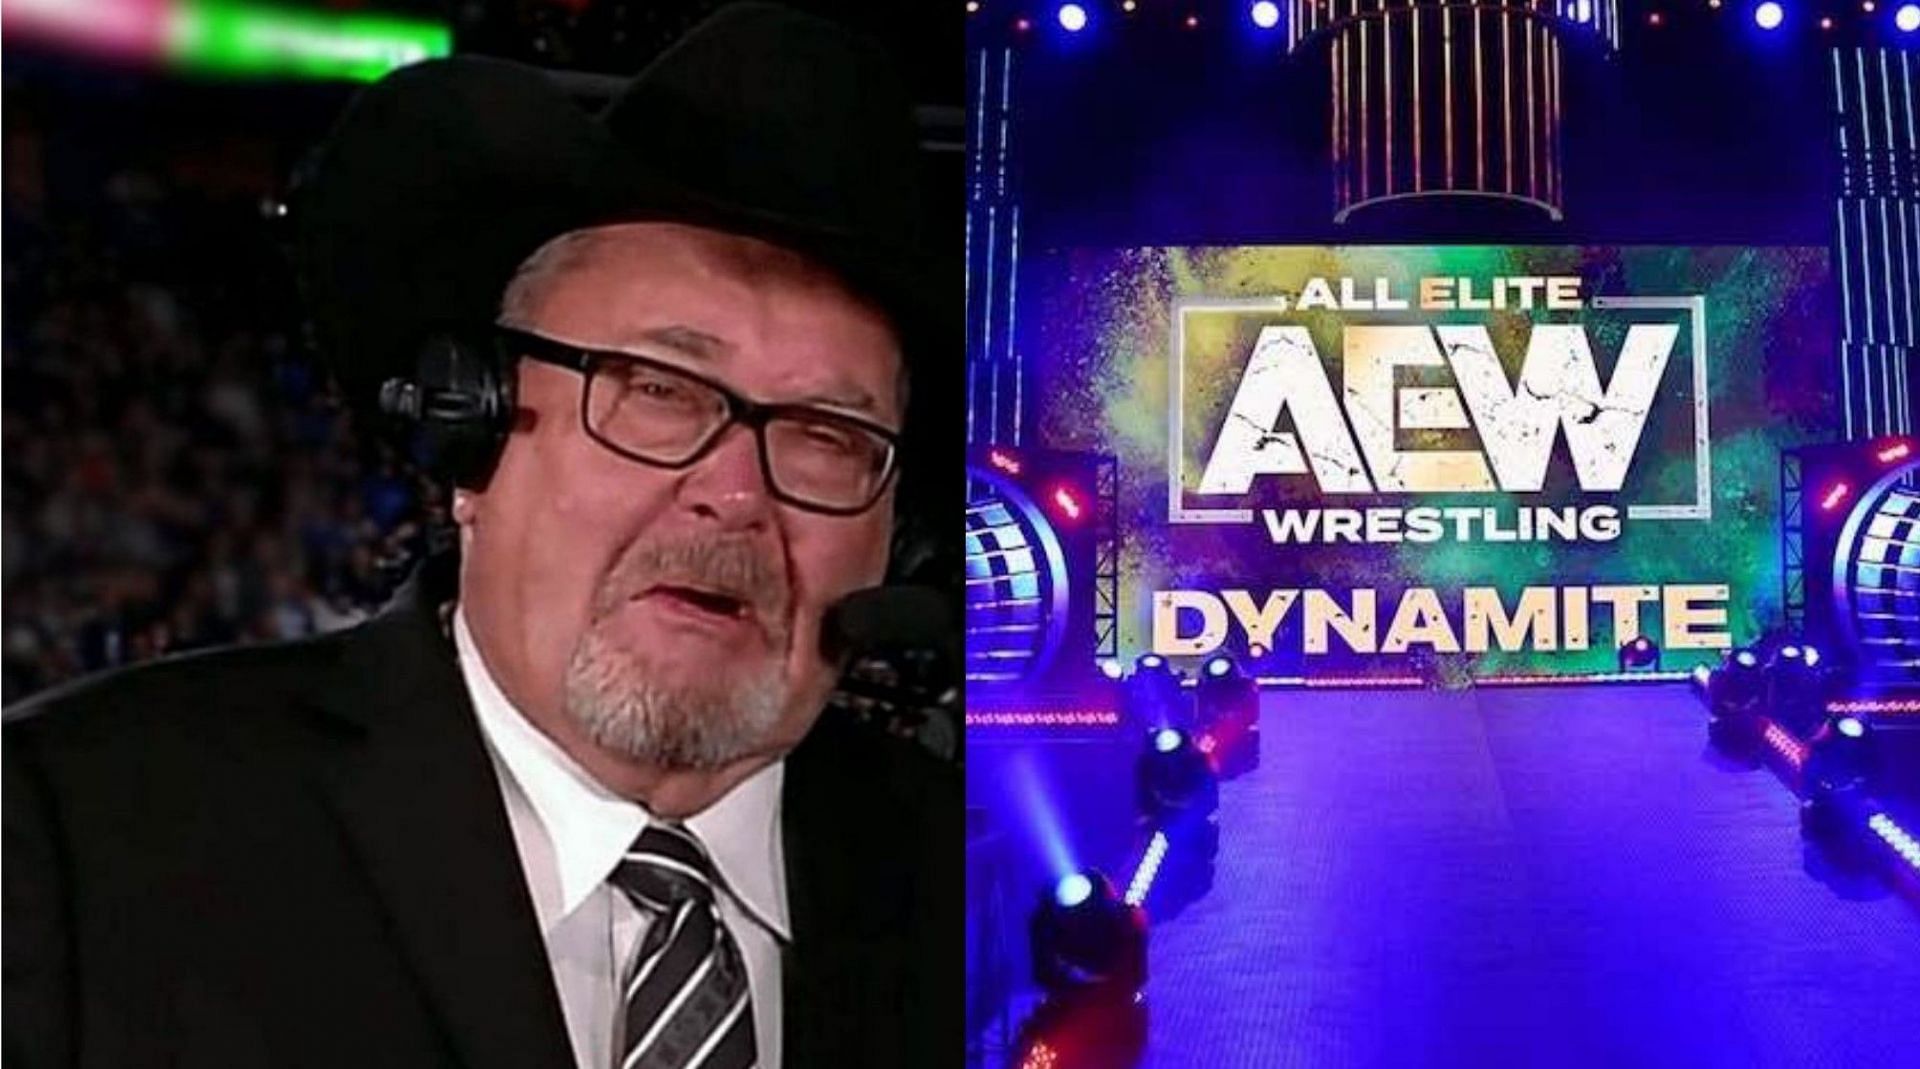 Will Jim Ross appear on AEW Dynamite this week?